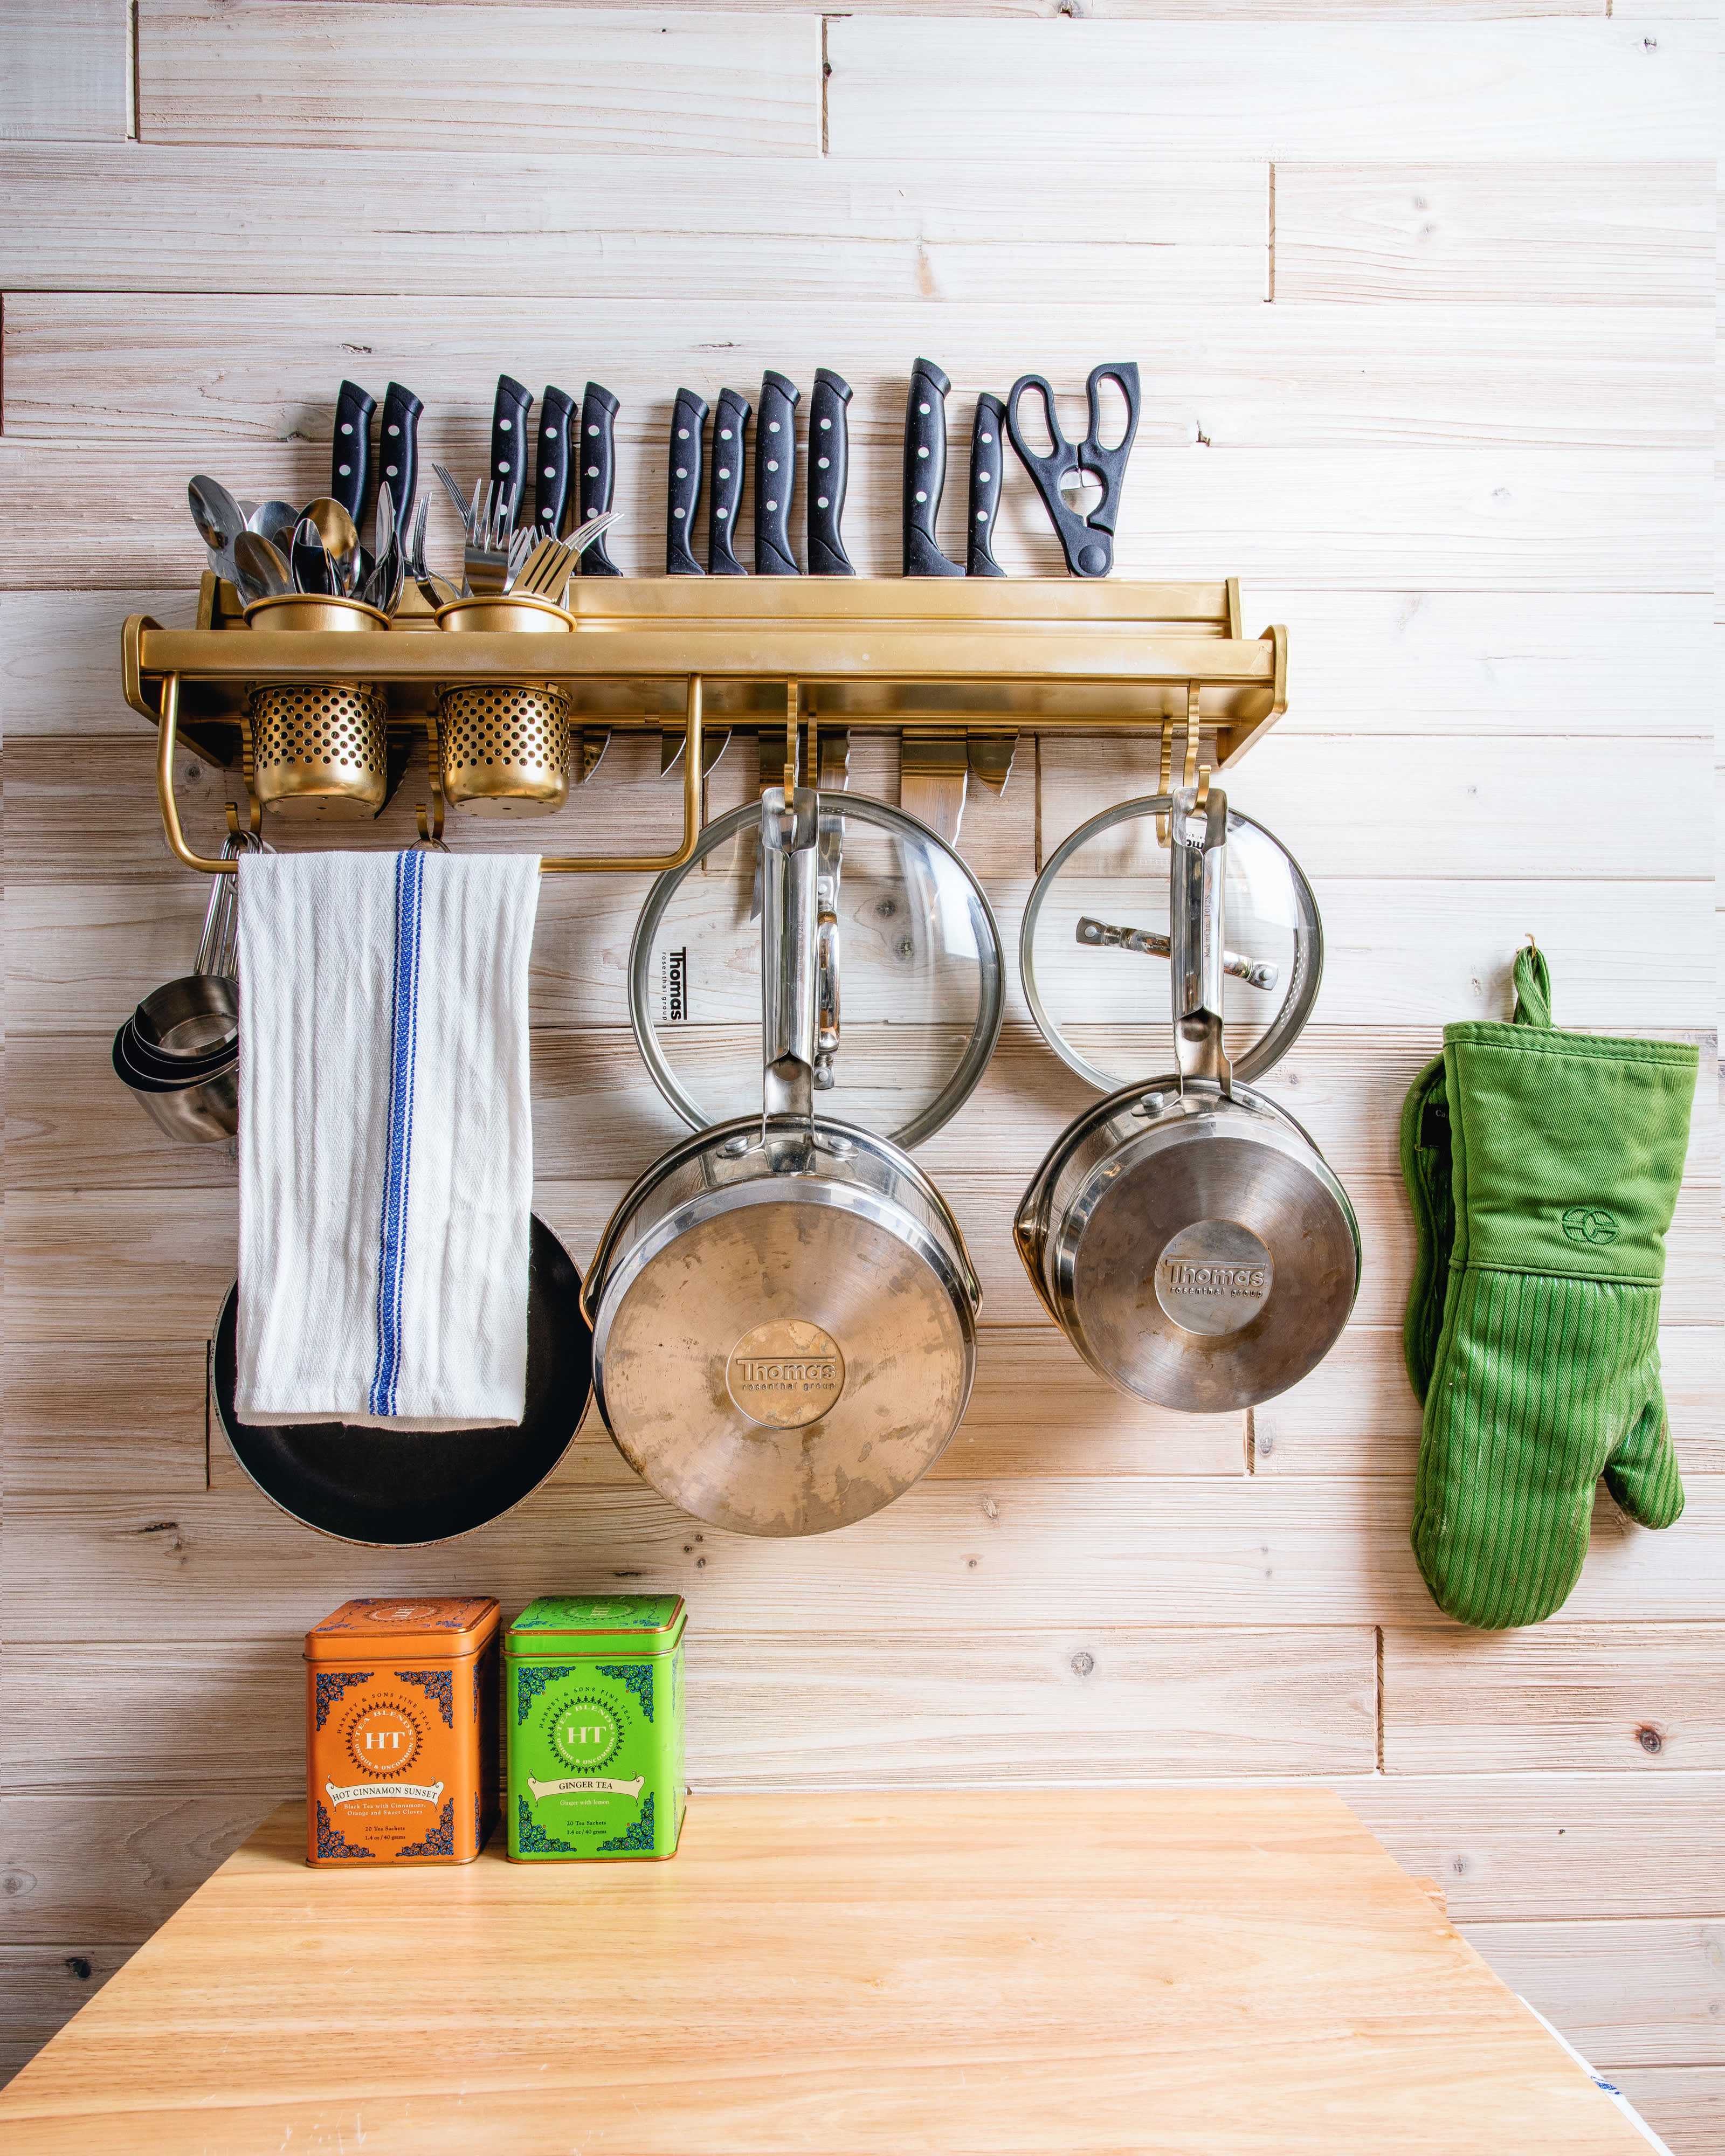 HANGING IT UP5 Tips on Pot Racks in the Kitchen